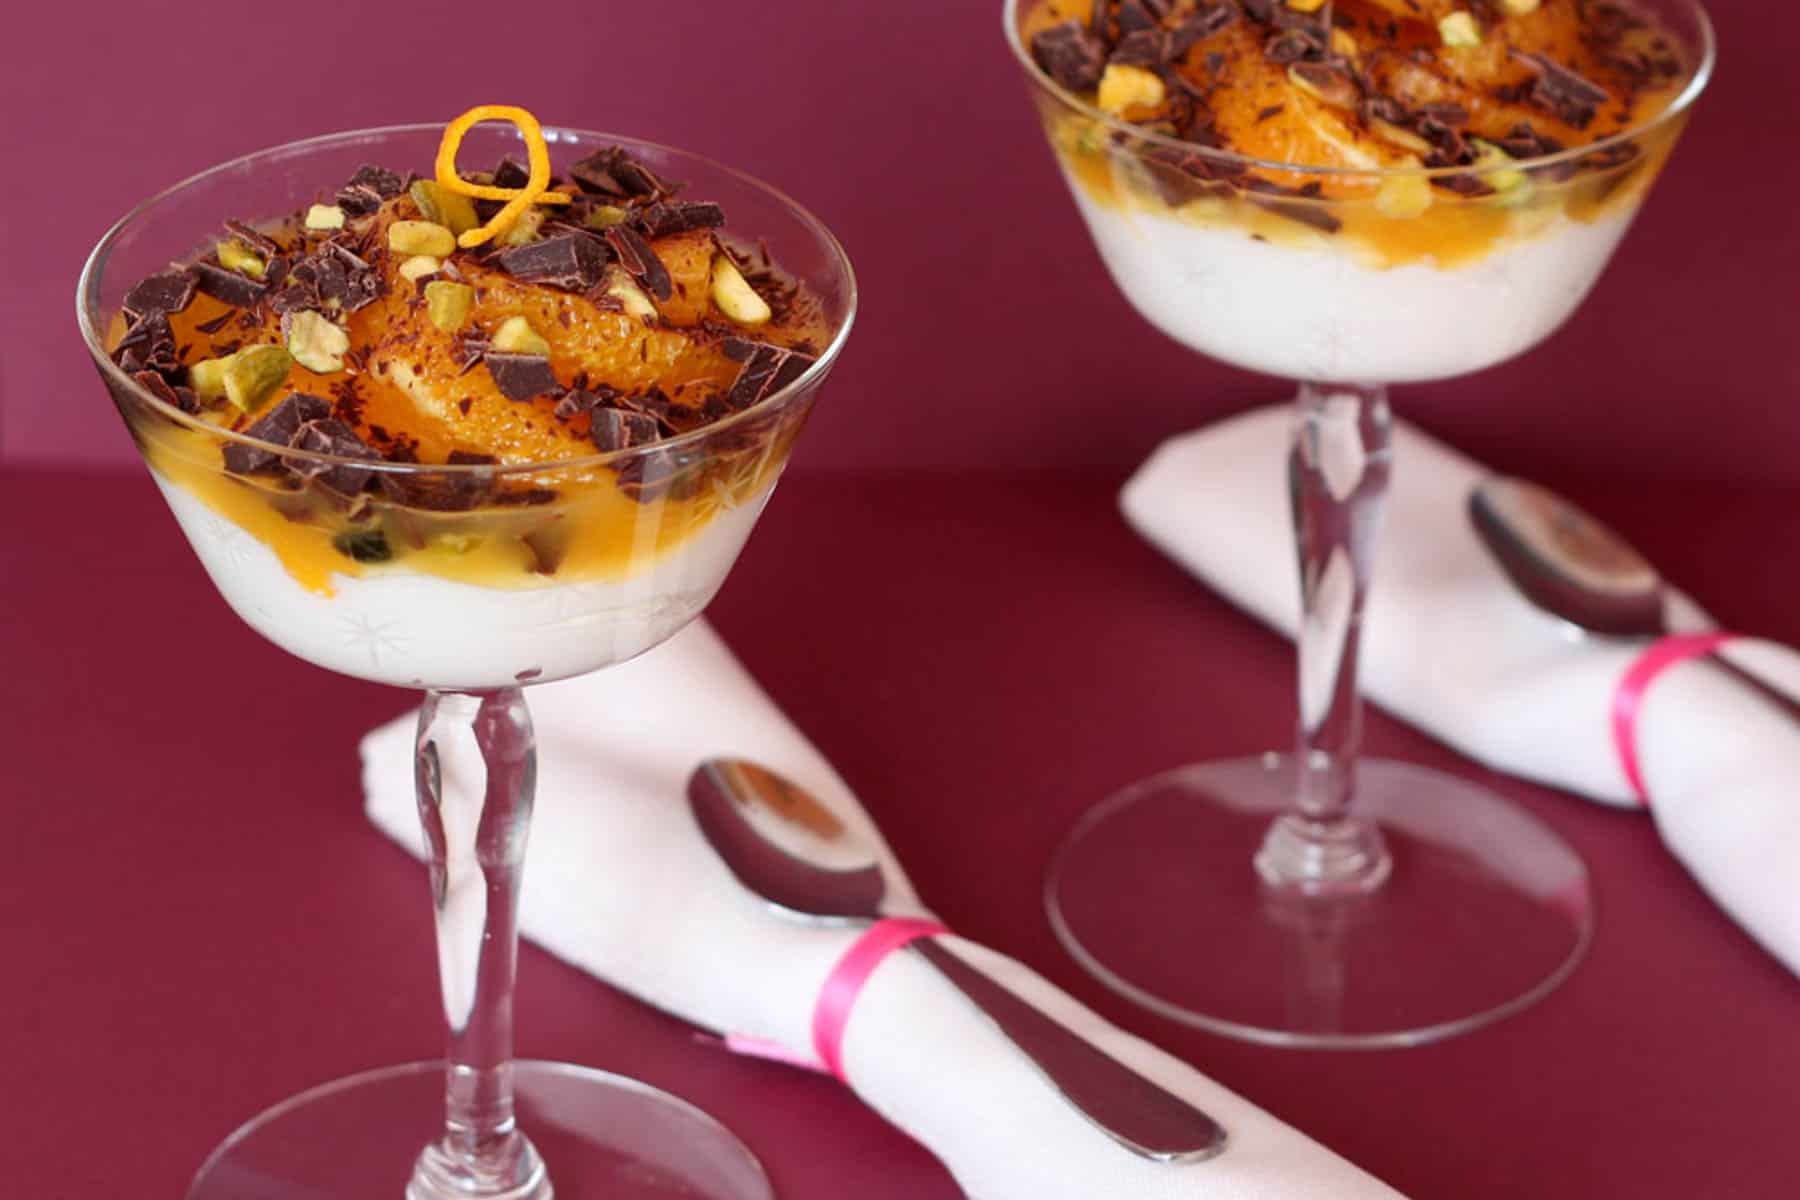 Two stemmed dessert glasses filled with yogurt, orange slices, dark chocolate chunks, and pistachios with rolled cloth napkins and spoons next to them.